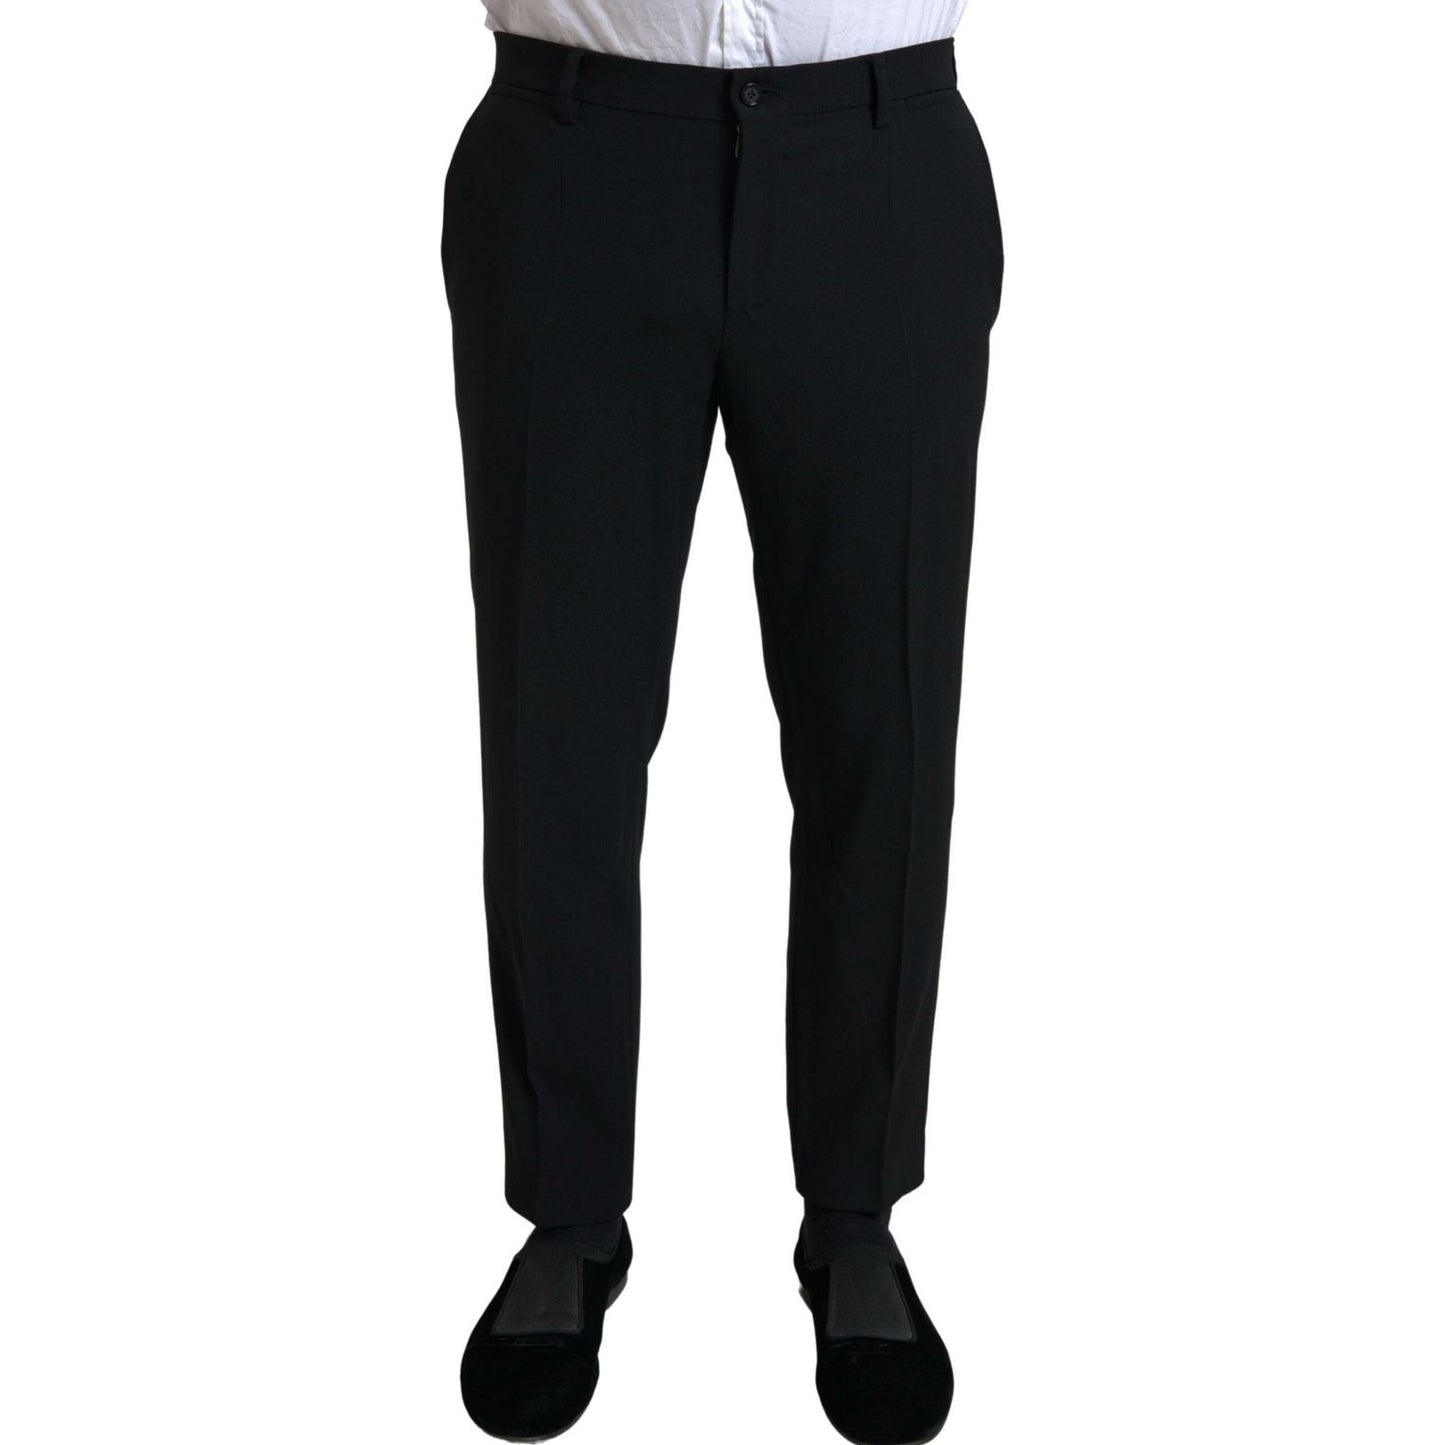 Dolce & Gabbana Elegant Slim Fit Double Breasted Suit black-2-piece-double-breasted-sicilia-suit